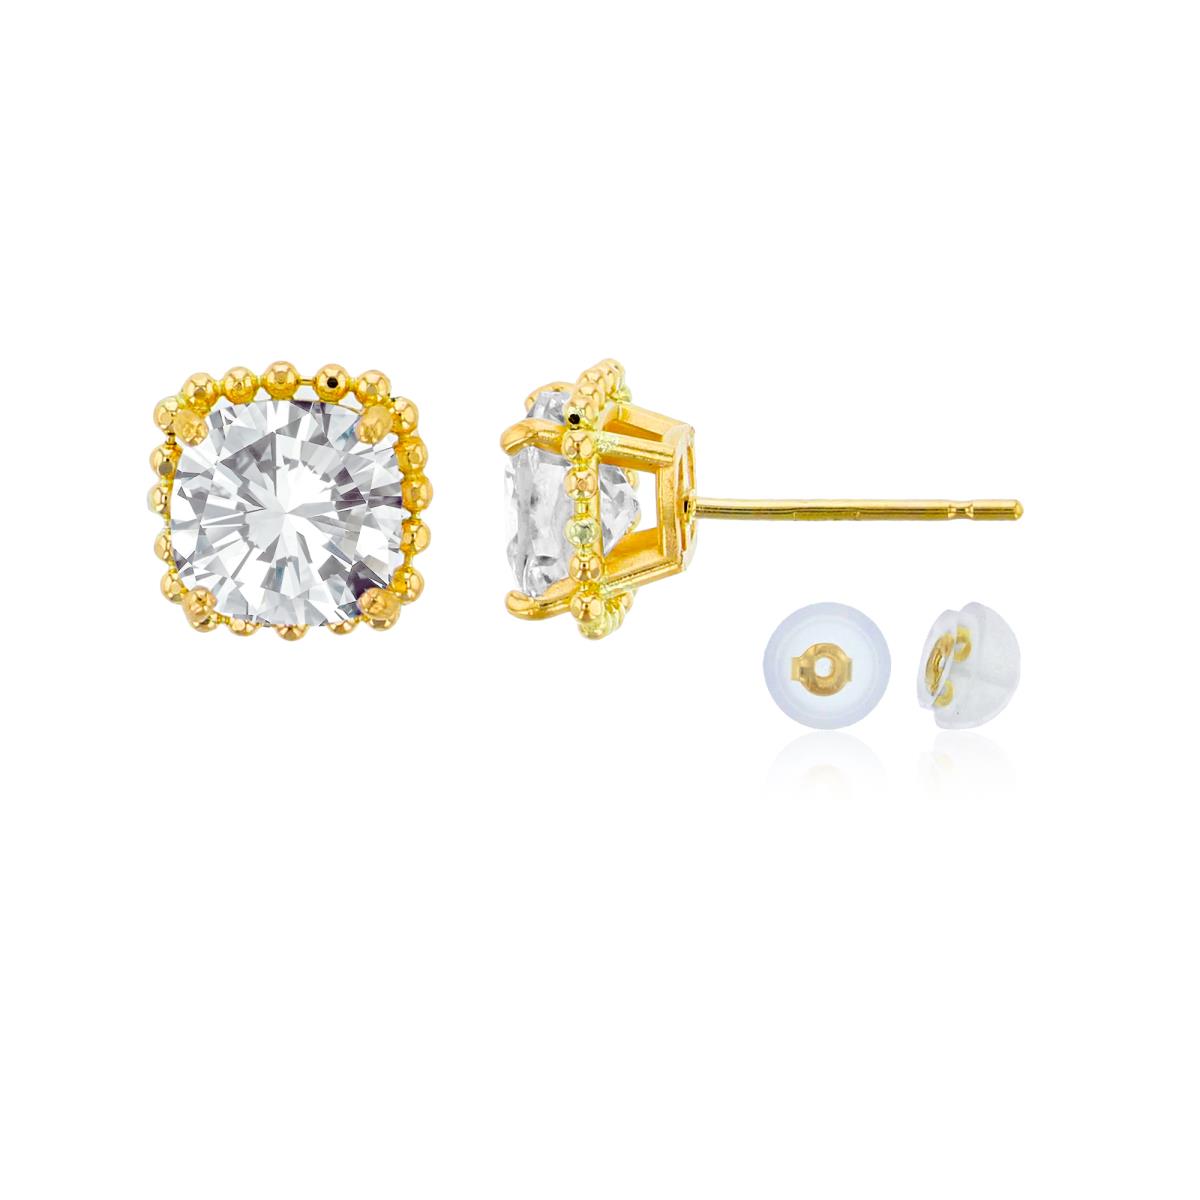 10K Yellow Gold 6x6mm Cushion Cut White Topaz Bead Frame Stud Earring with Silicone Back